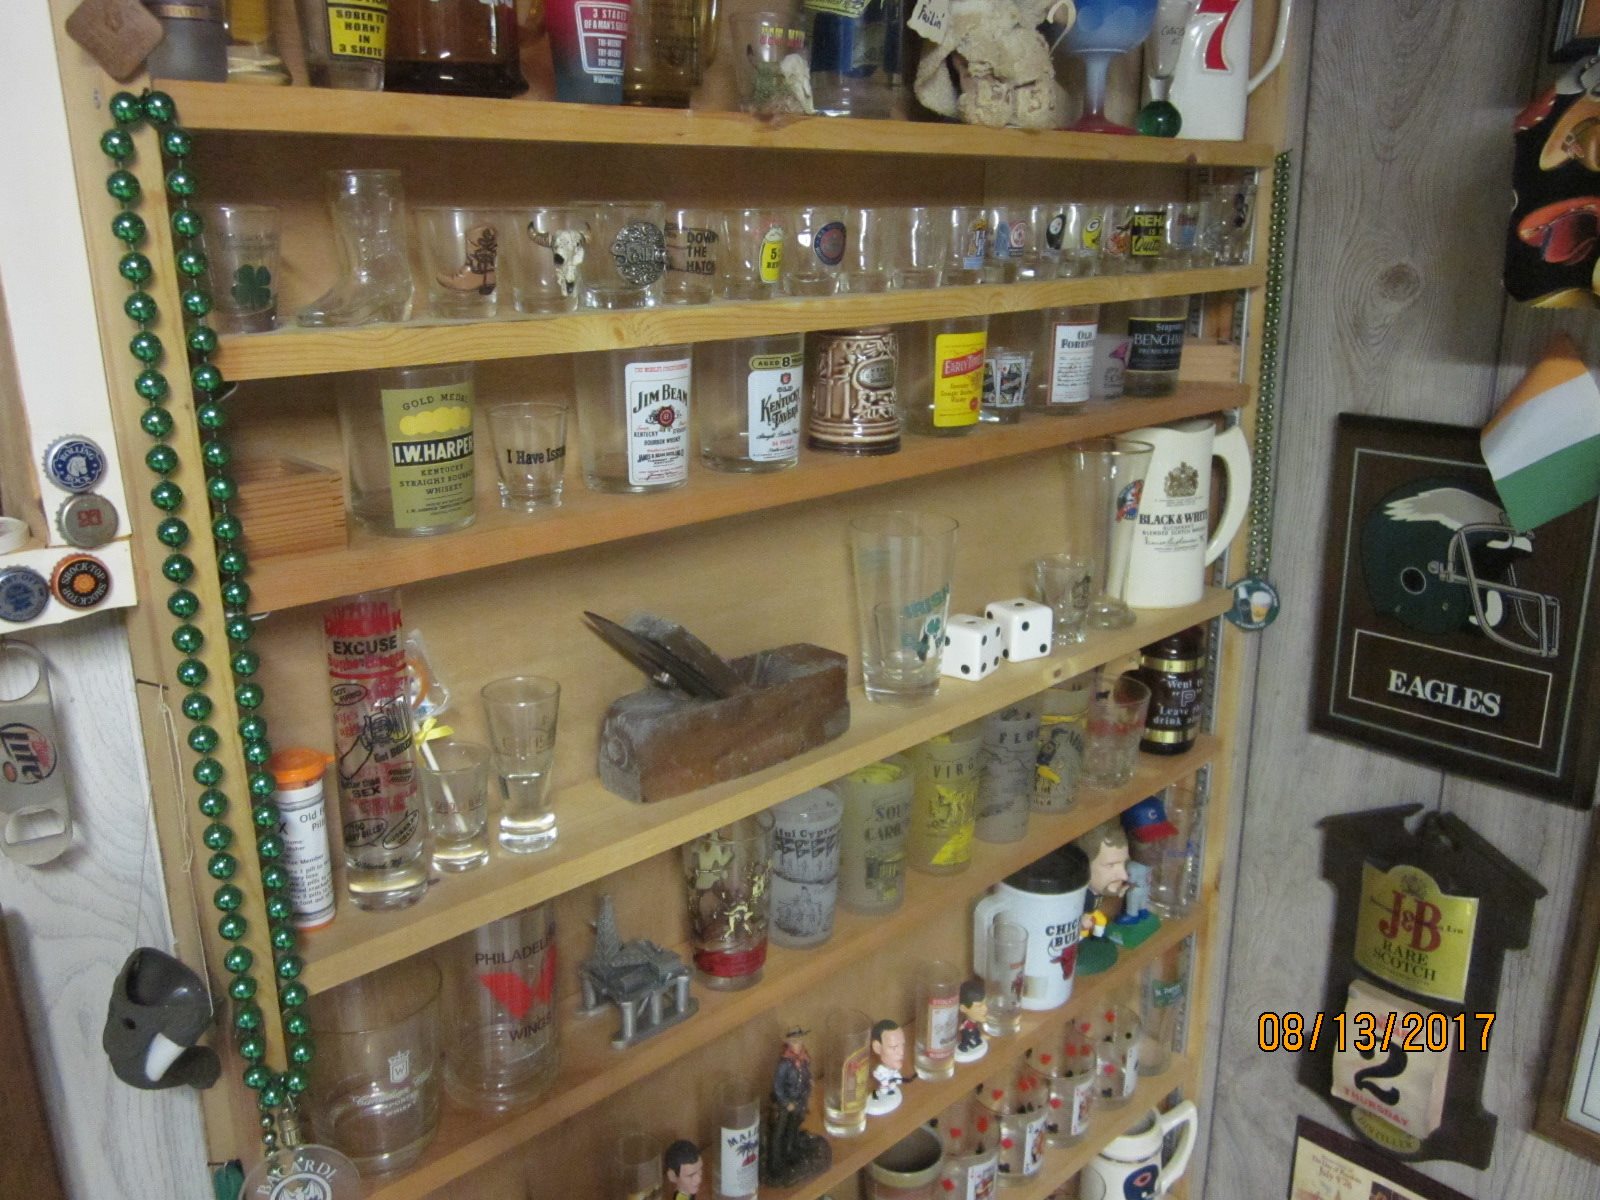 Friends Discover an Amazing Collection After Their Friend Passed Away